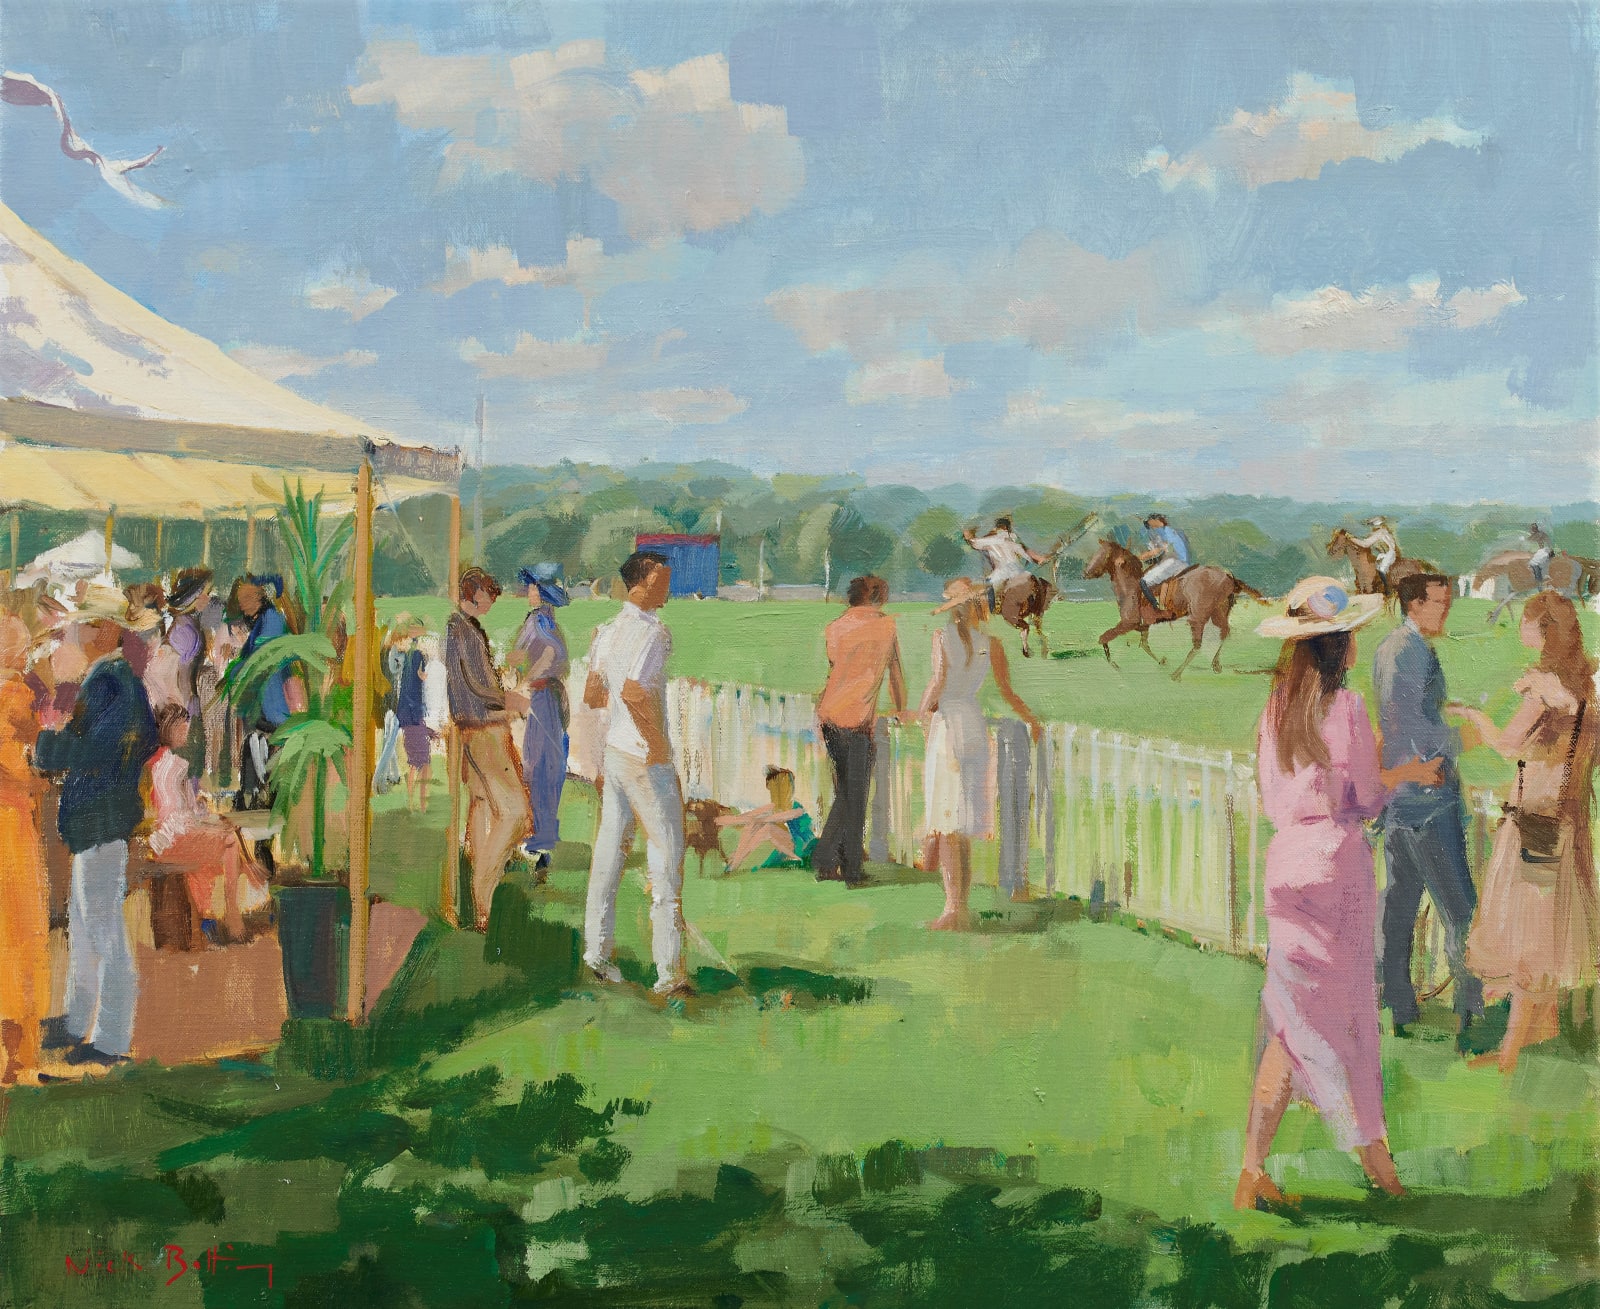 Nick Botting, Smith's Lawn, The Final